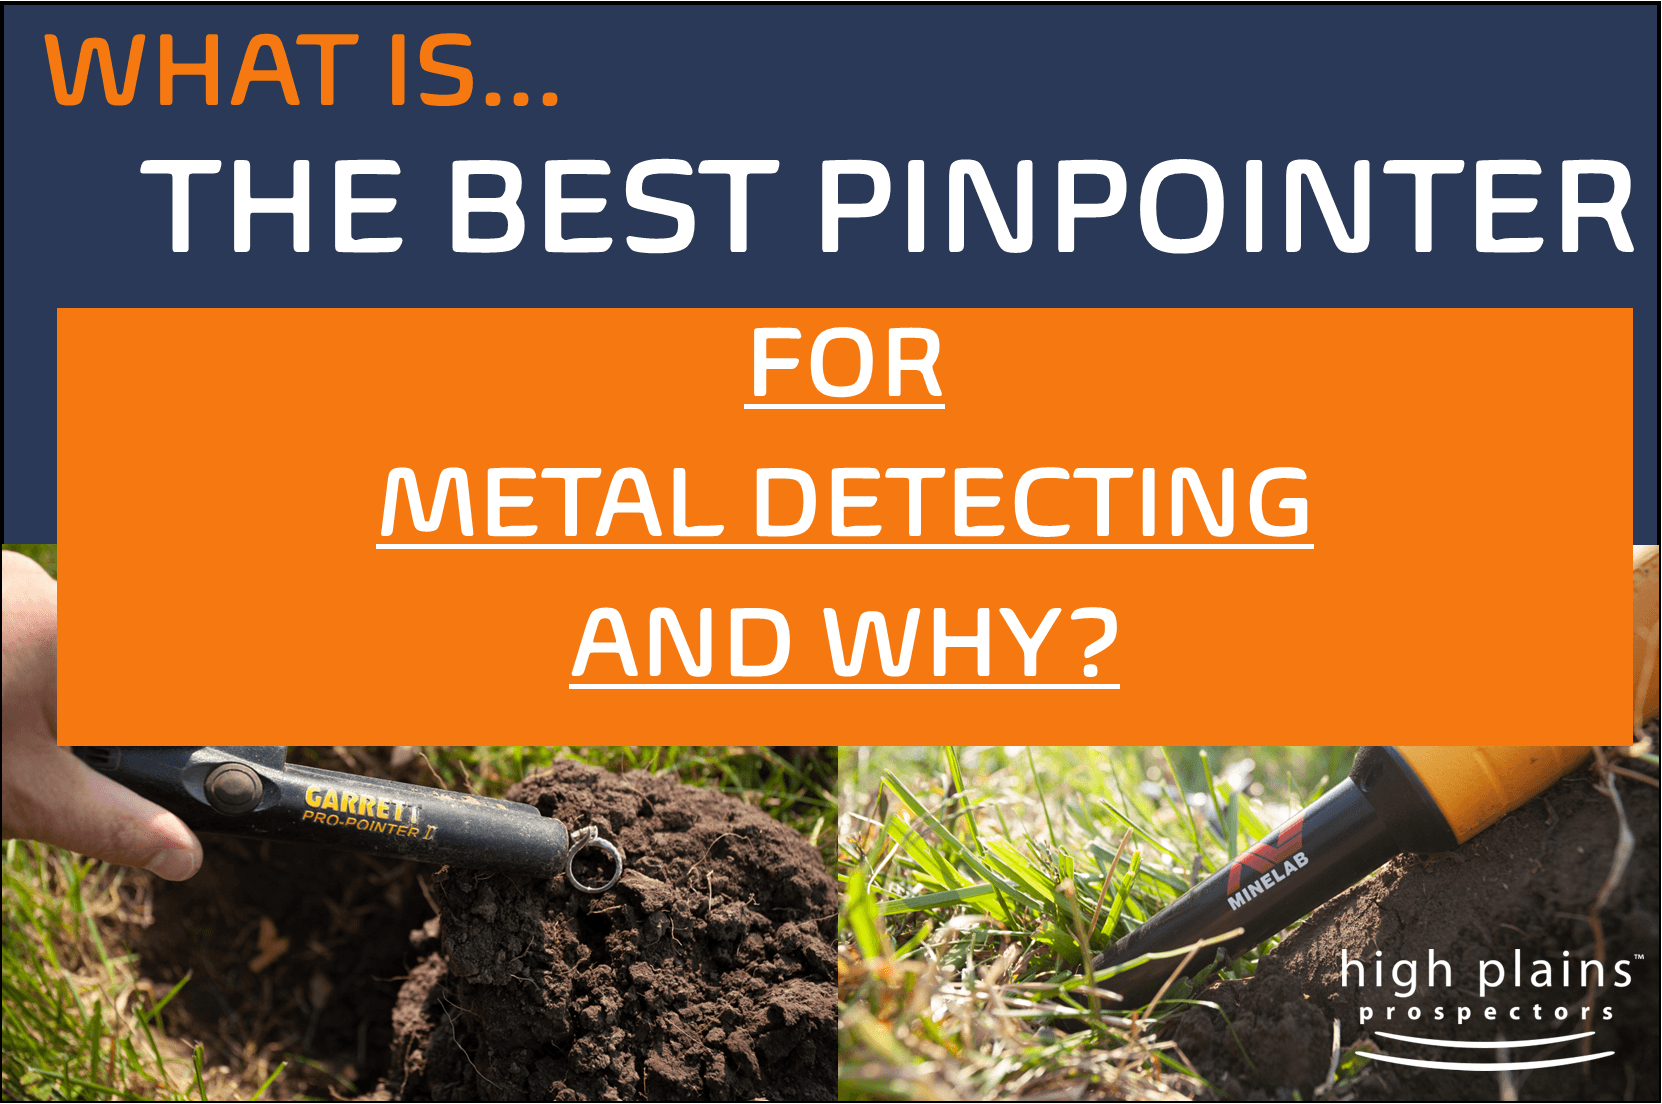 FAQ:  What is the best pinpointer for metal detecting and why?